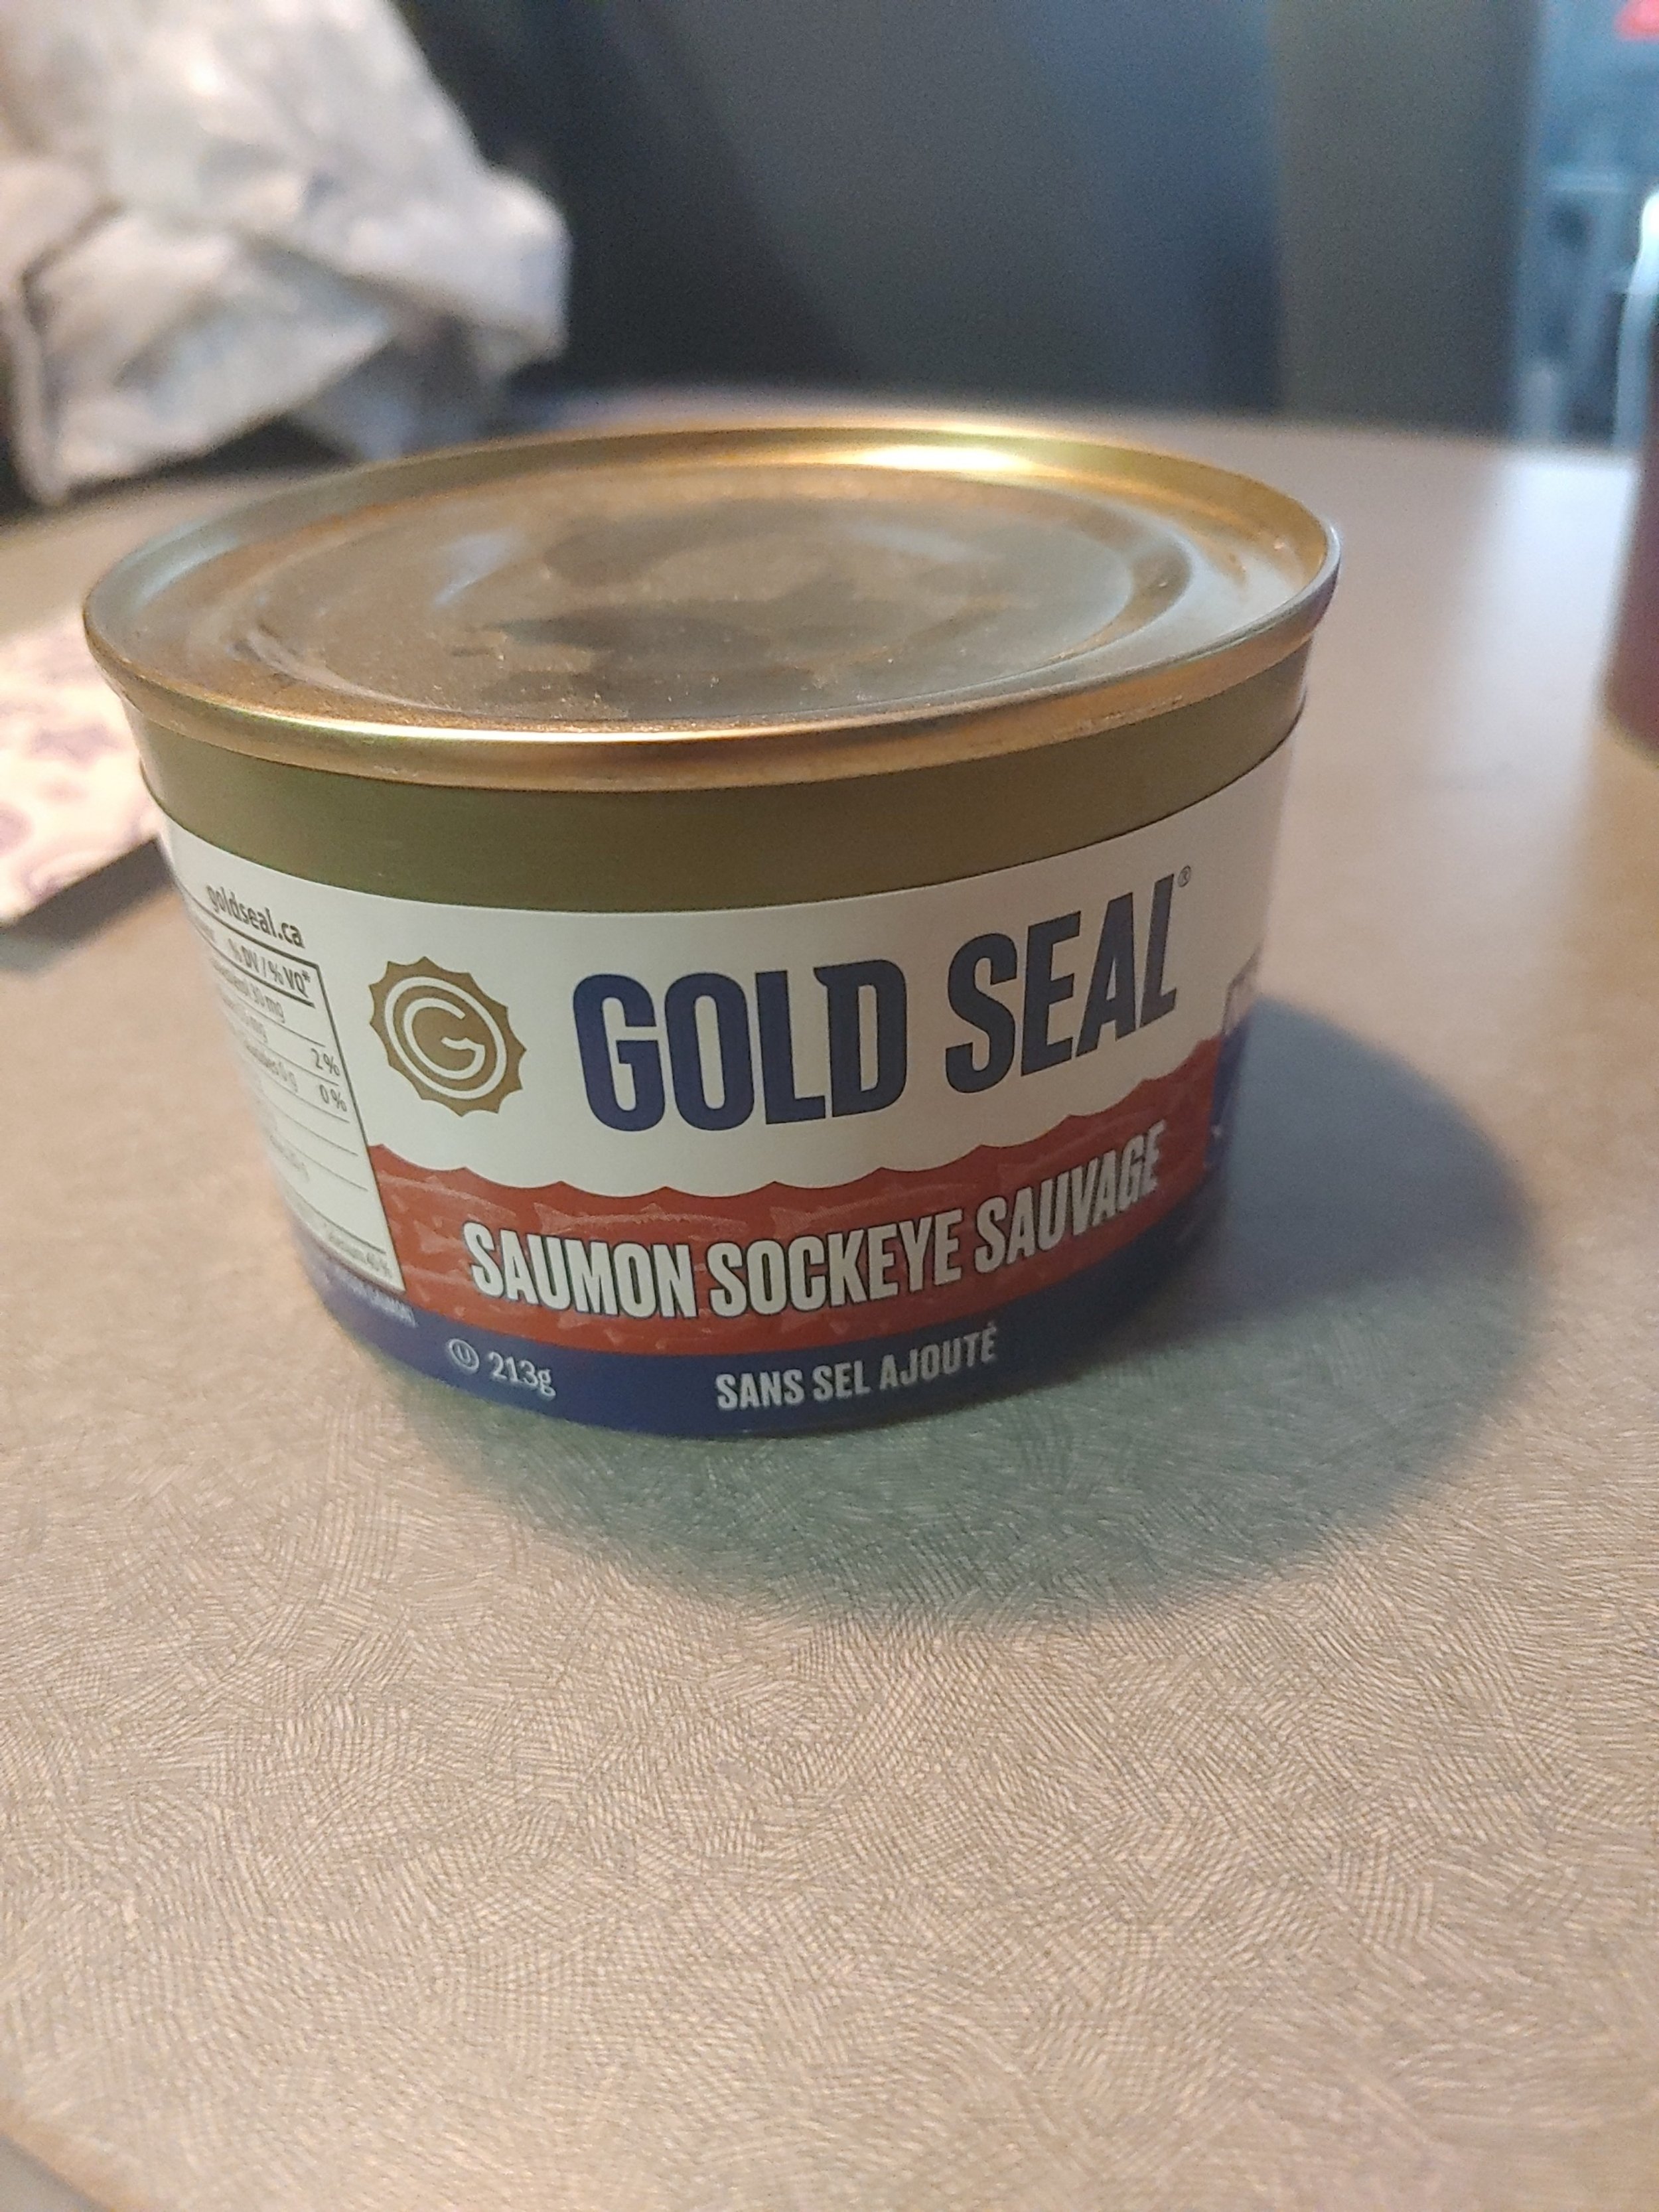  Arrived to Mt. Robson. FEED ME.   This is the best canned salmon I’ve ever had. 